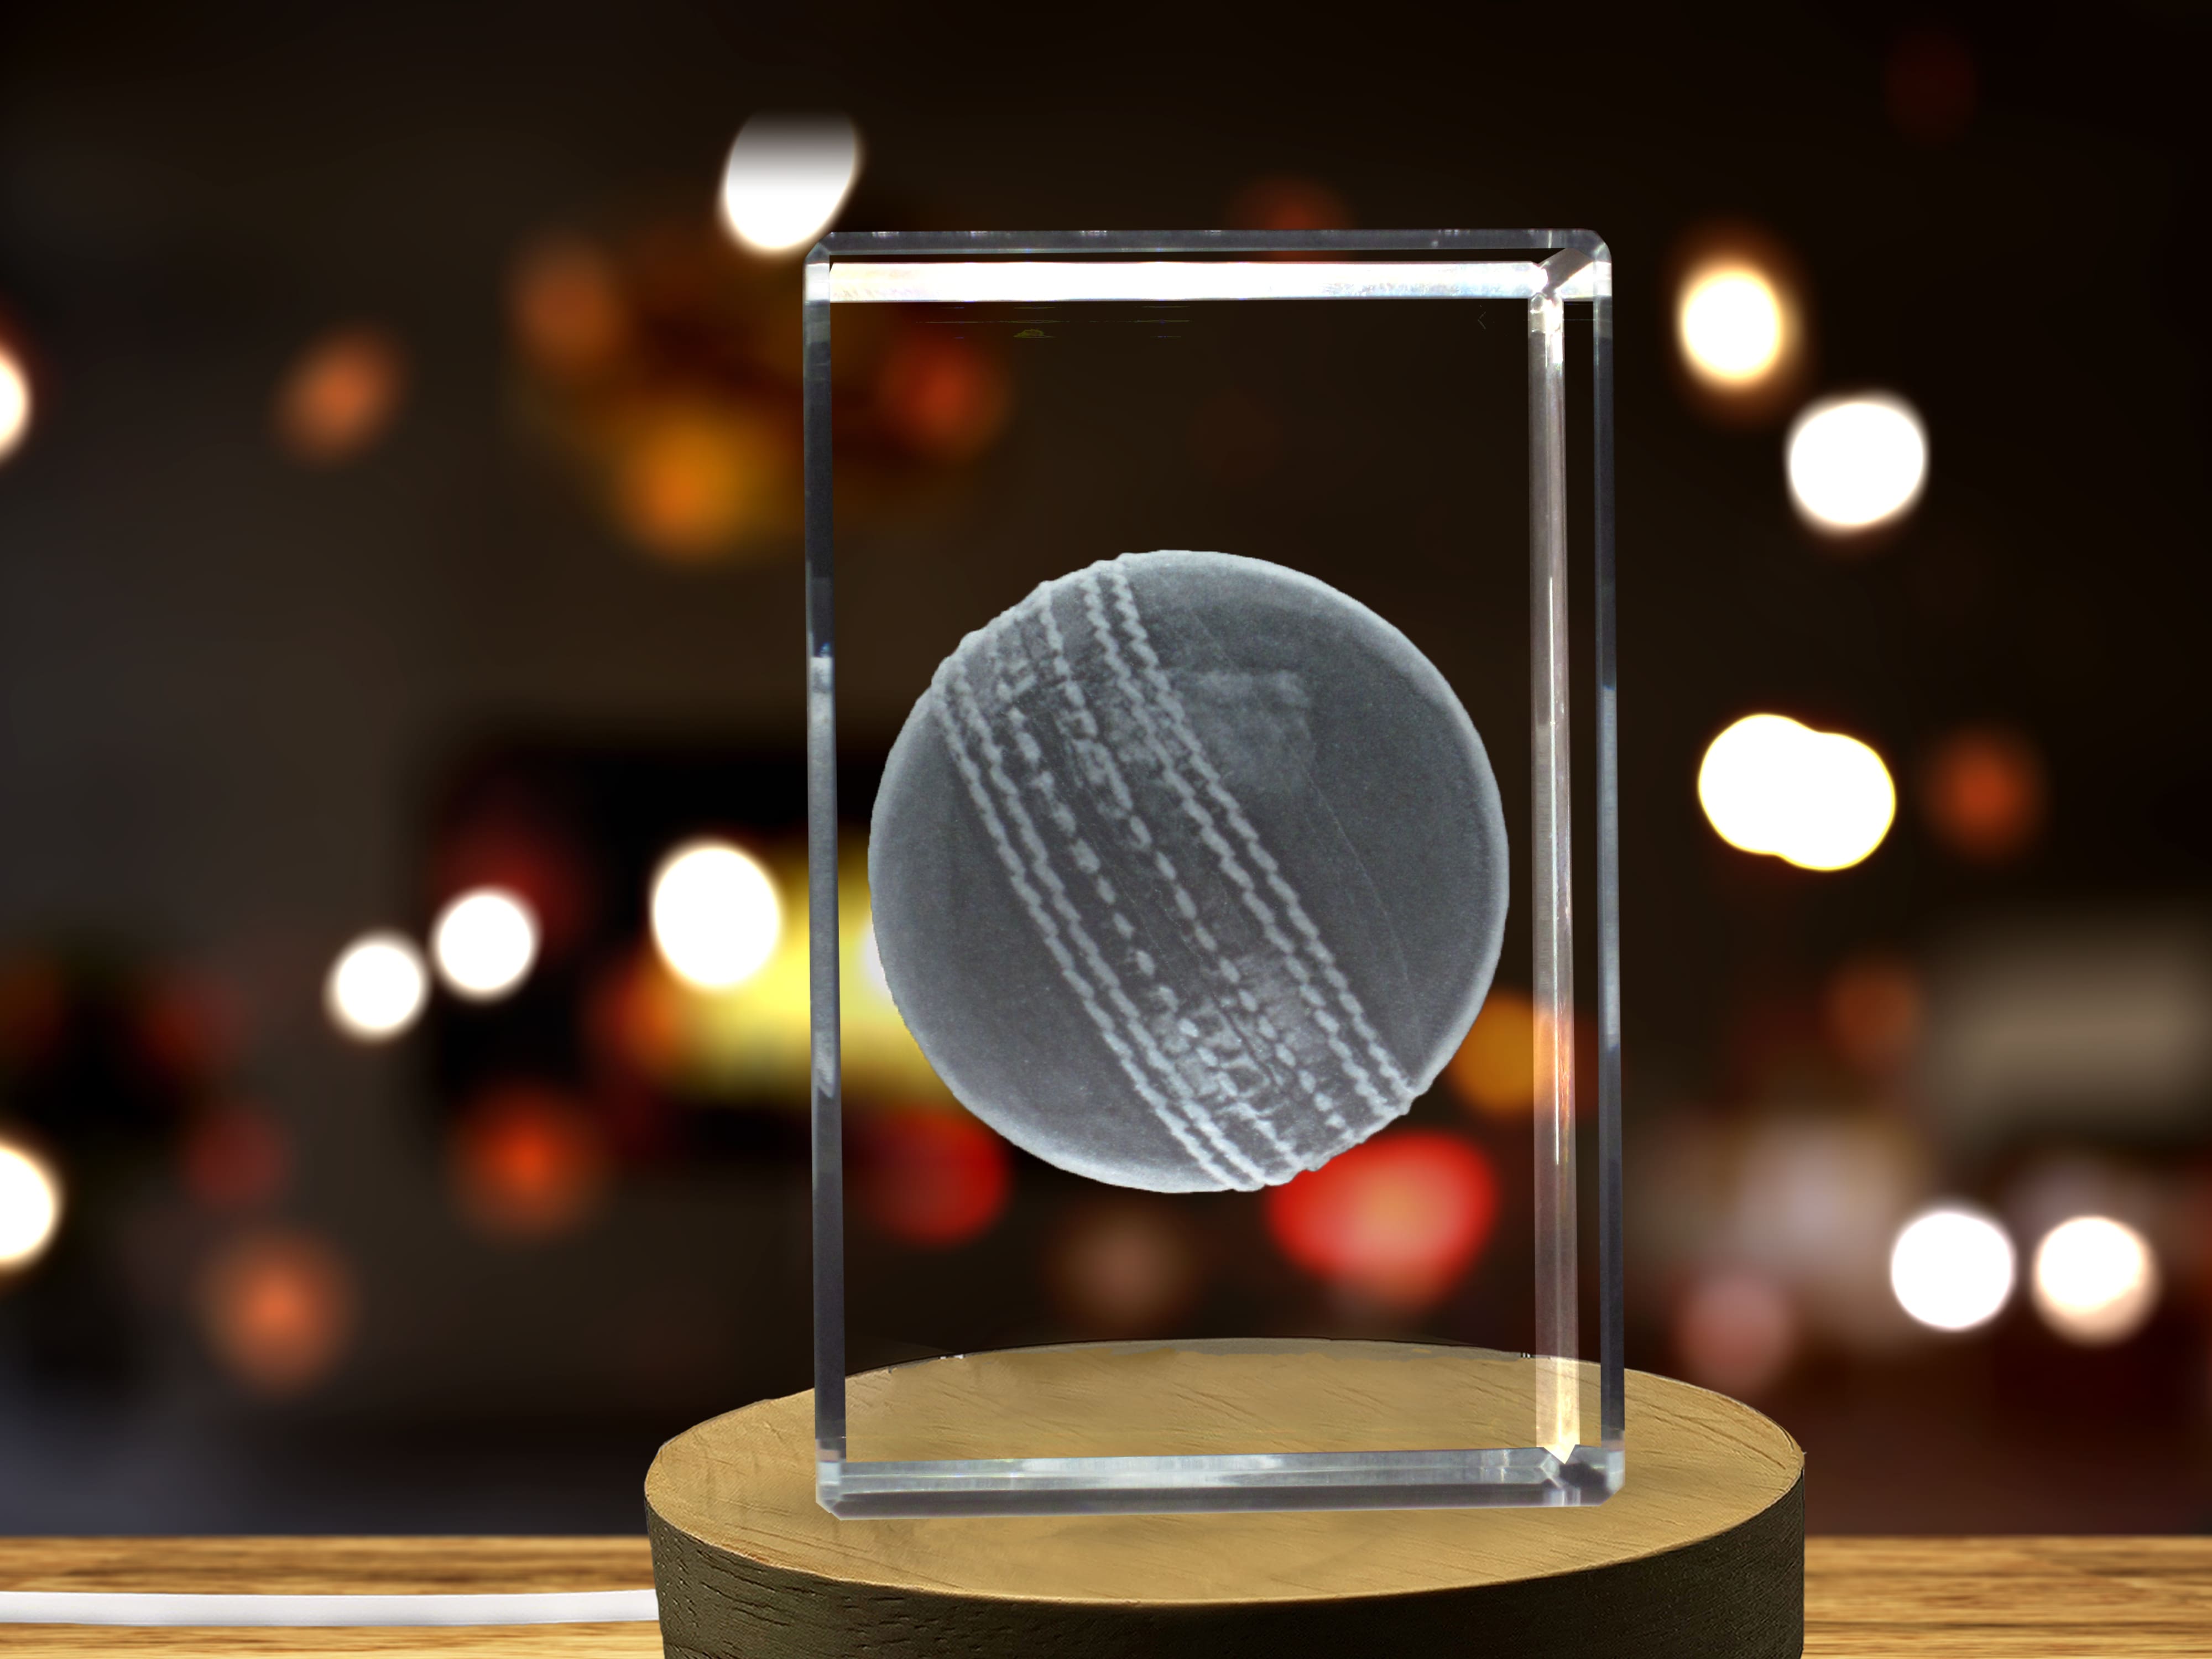 Cricket Ball 3D Engraved Crystal | 3D Engraved Crystal Sport A&B Crystal Collection